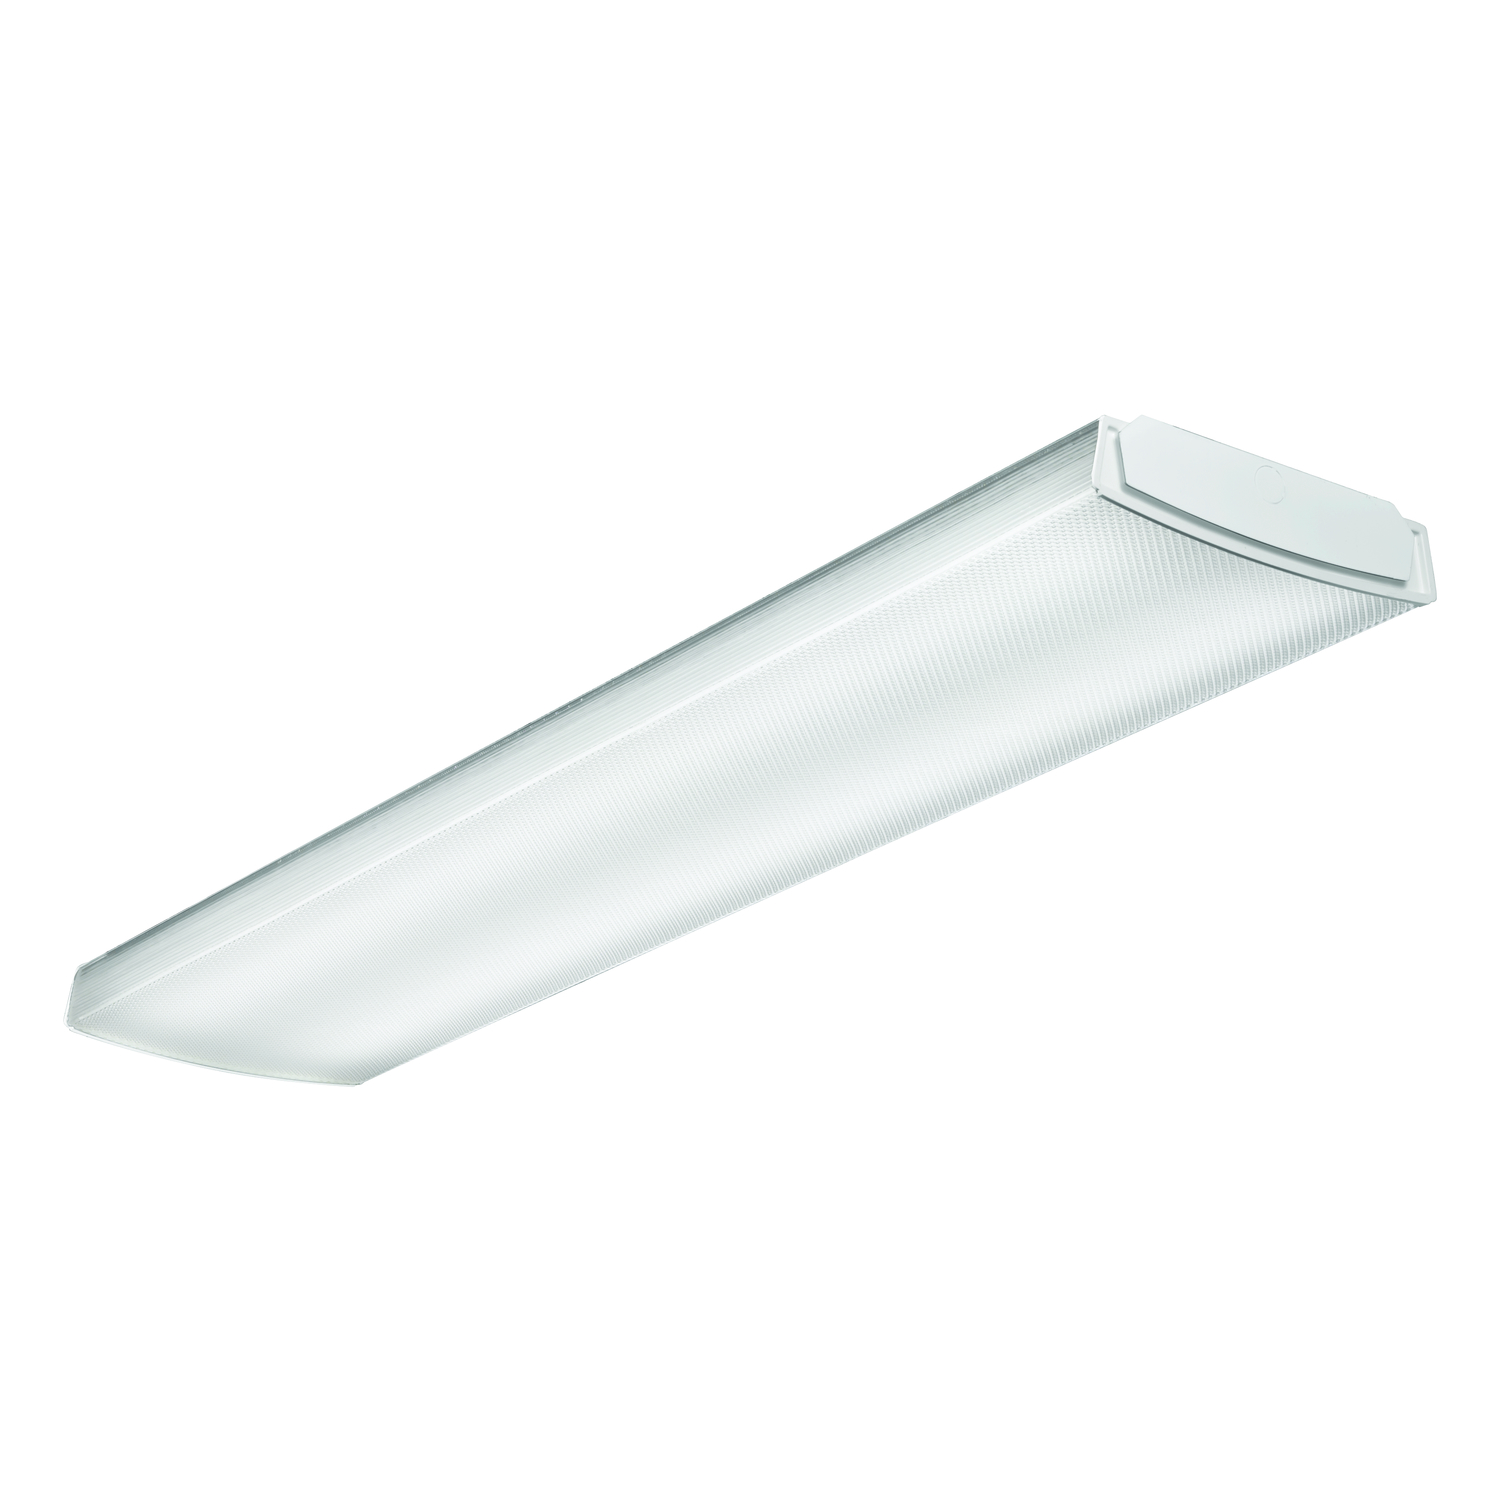 Lithonia Lighting LED Wrap Fixture in White (217NVY)